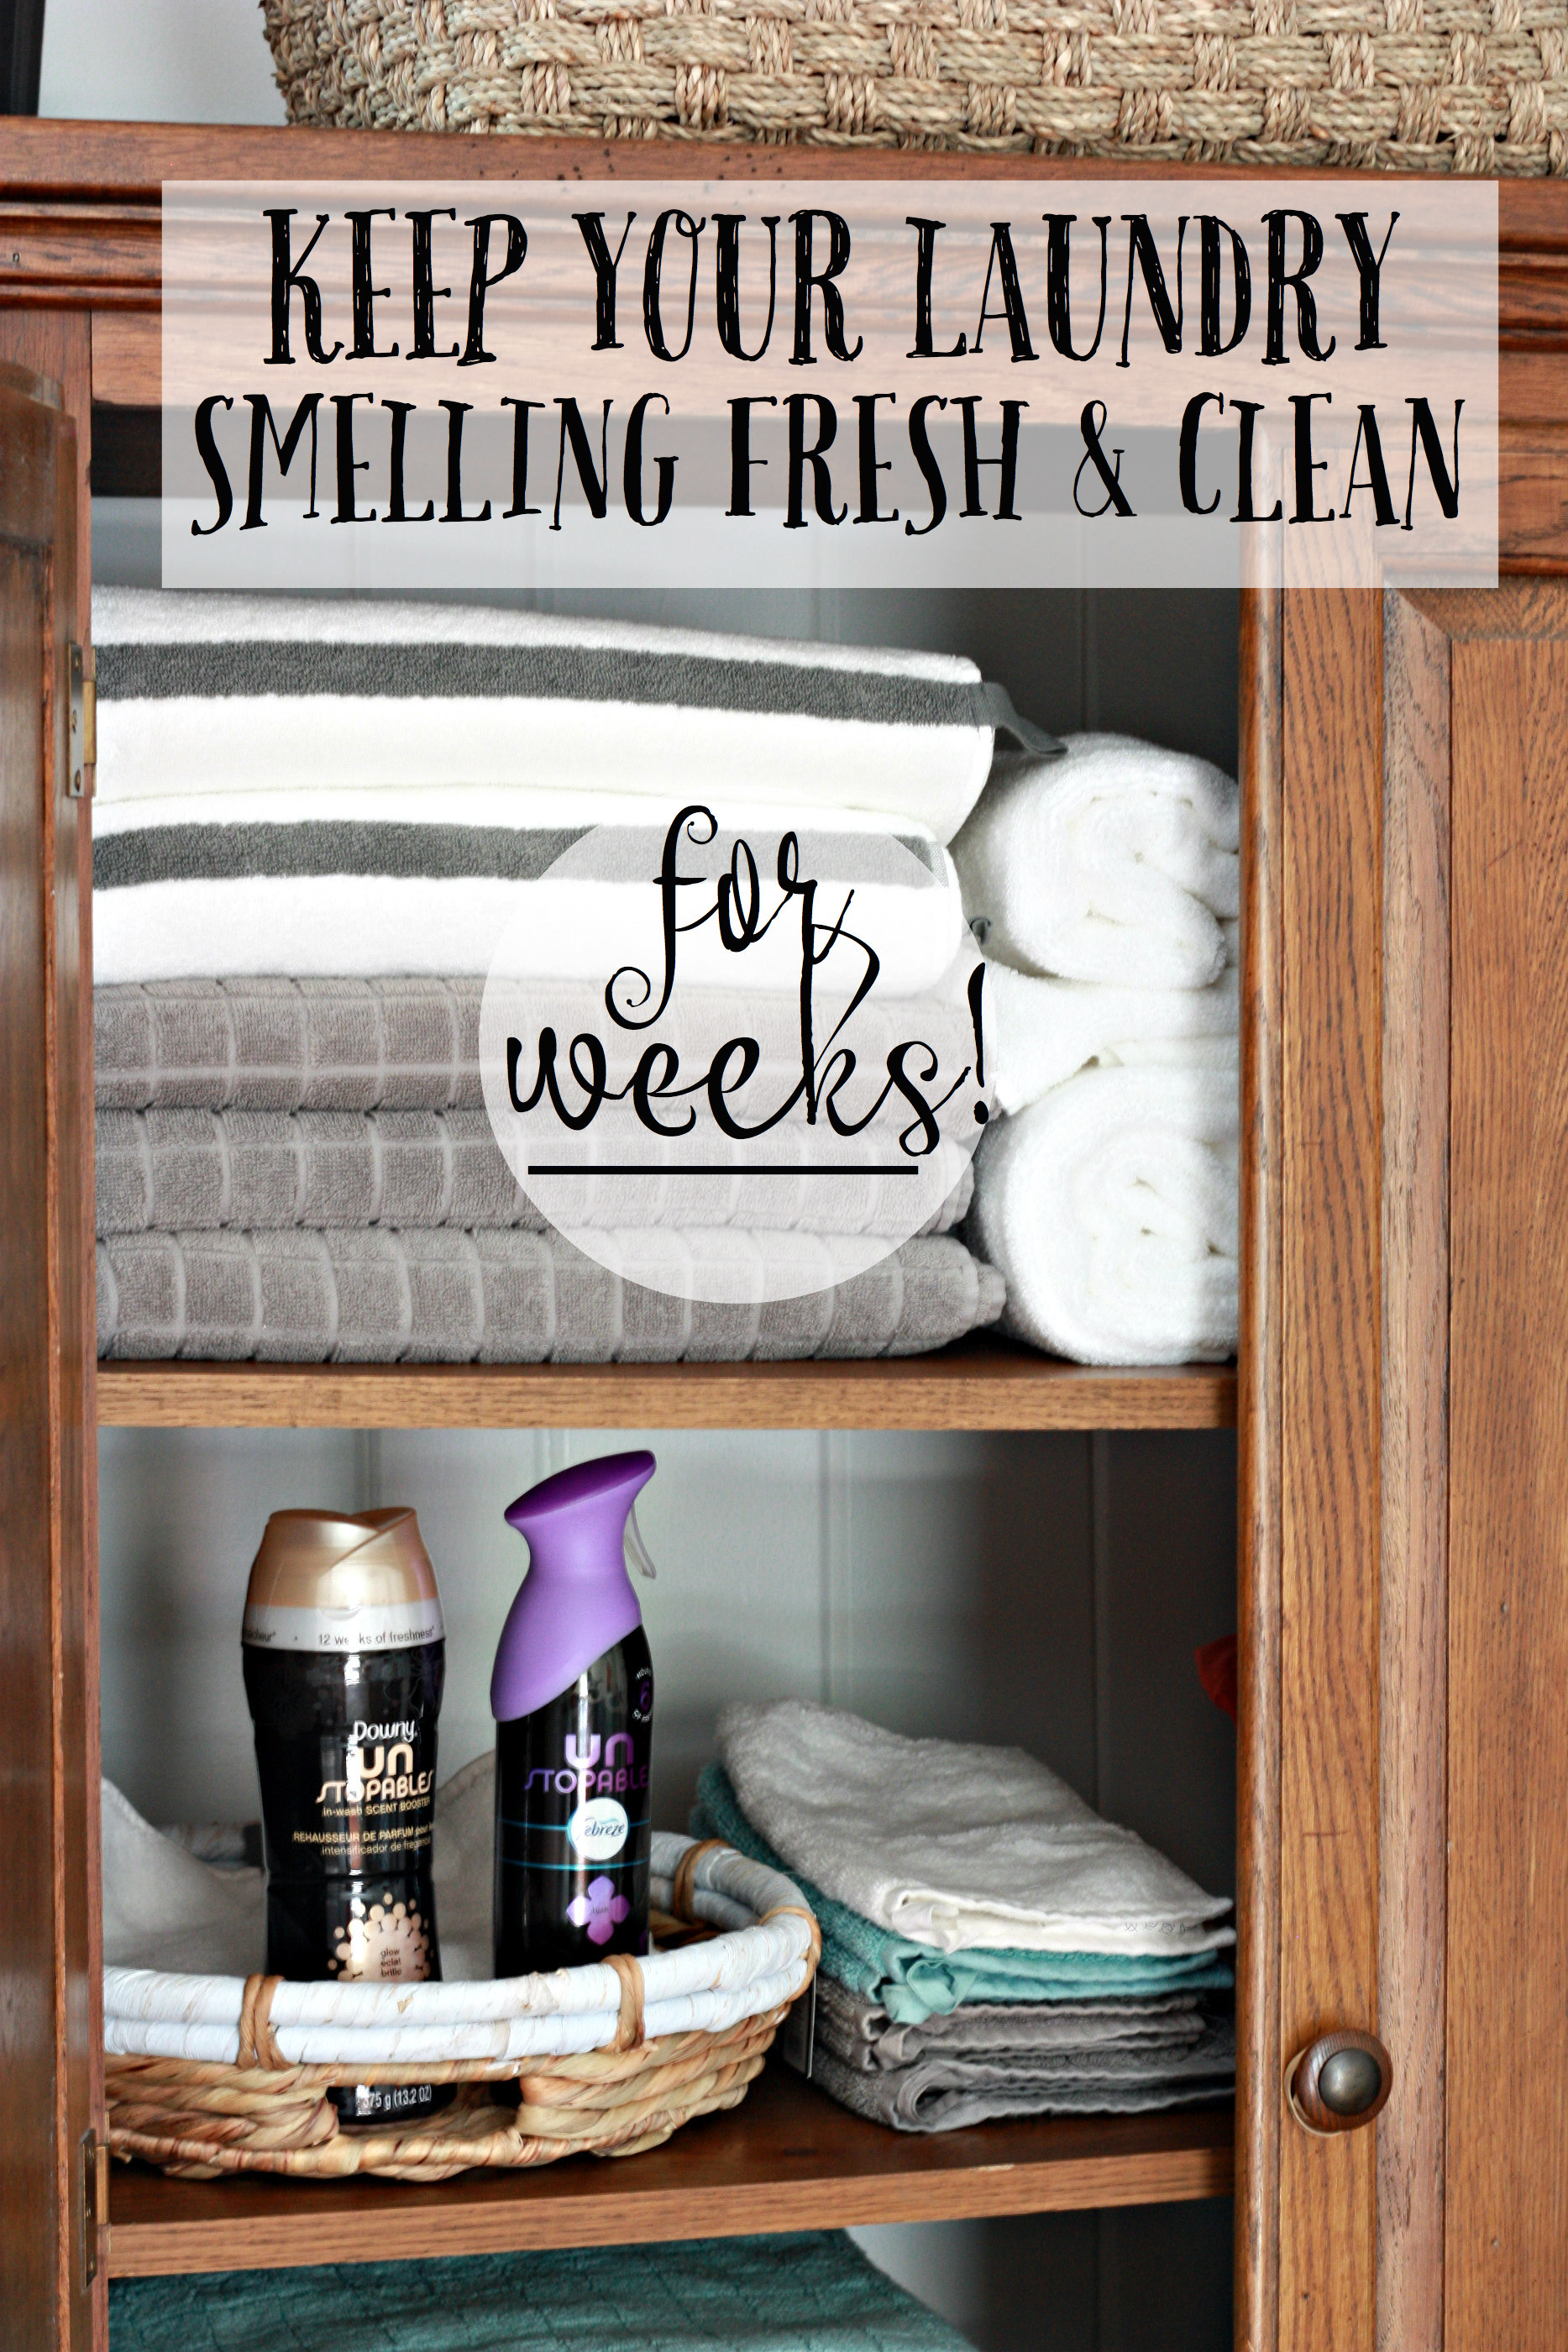 https://www.nestofposies-blog.com/wp-content/uploads/2015/11/How-to-keep-your-laundry-smelling-clean-for-weeks.jpg